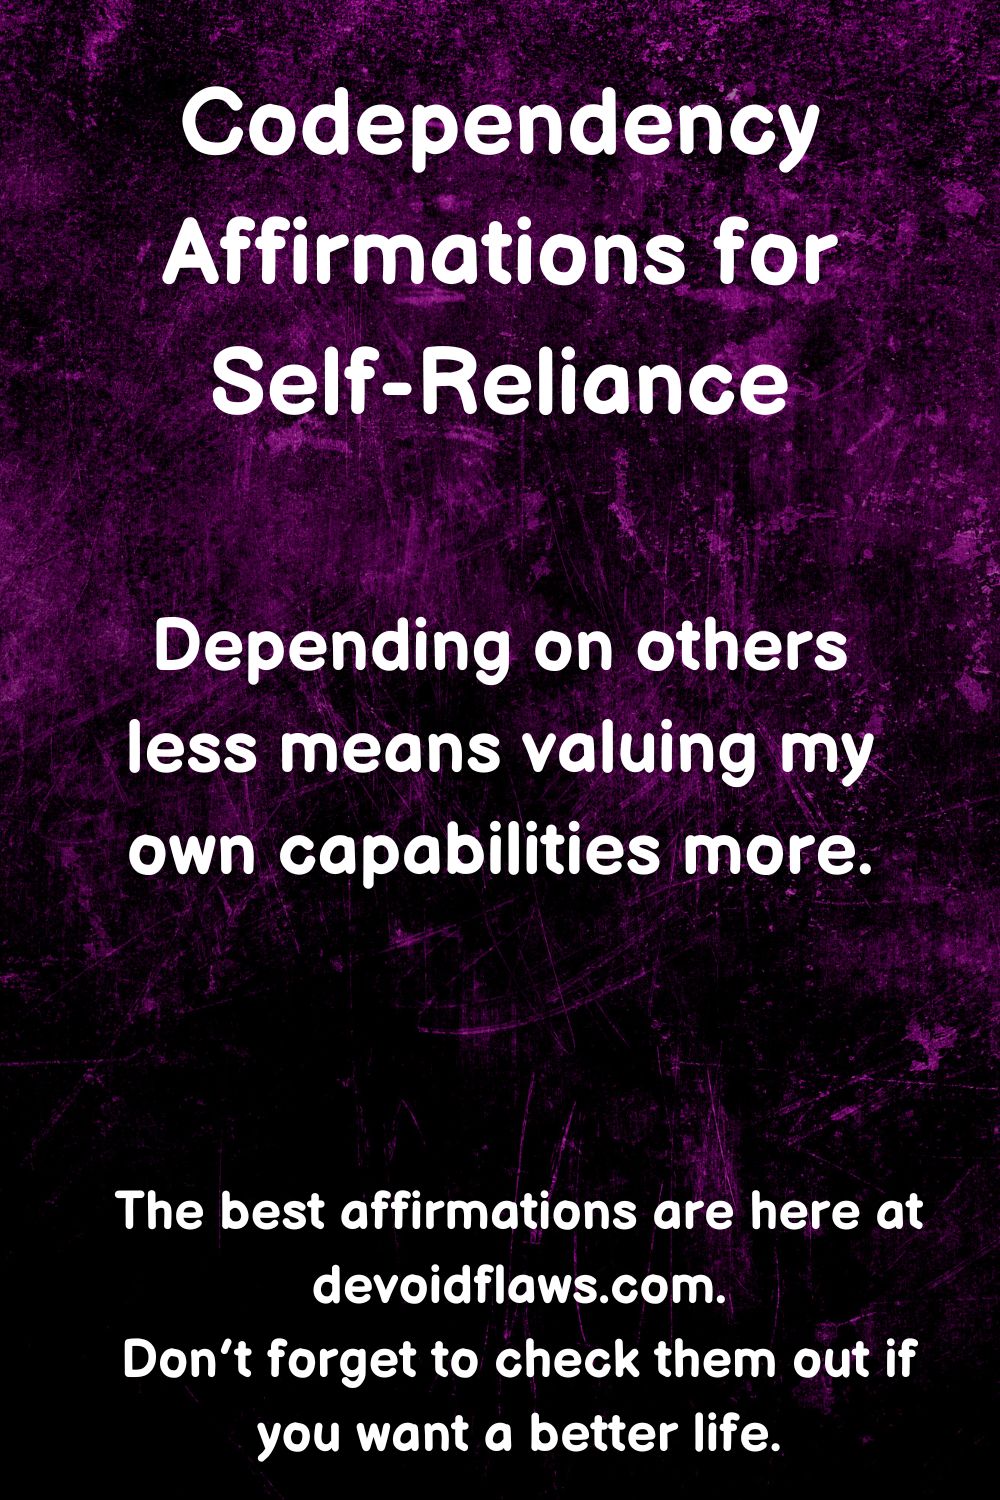 codependency affirmation for self-reliance